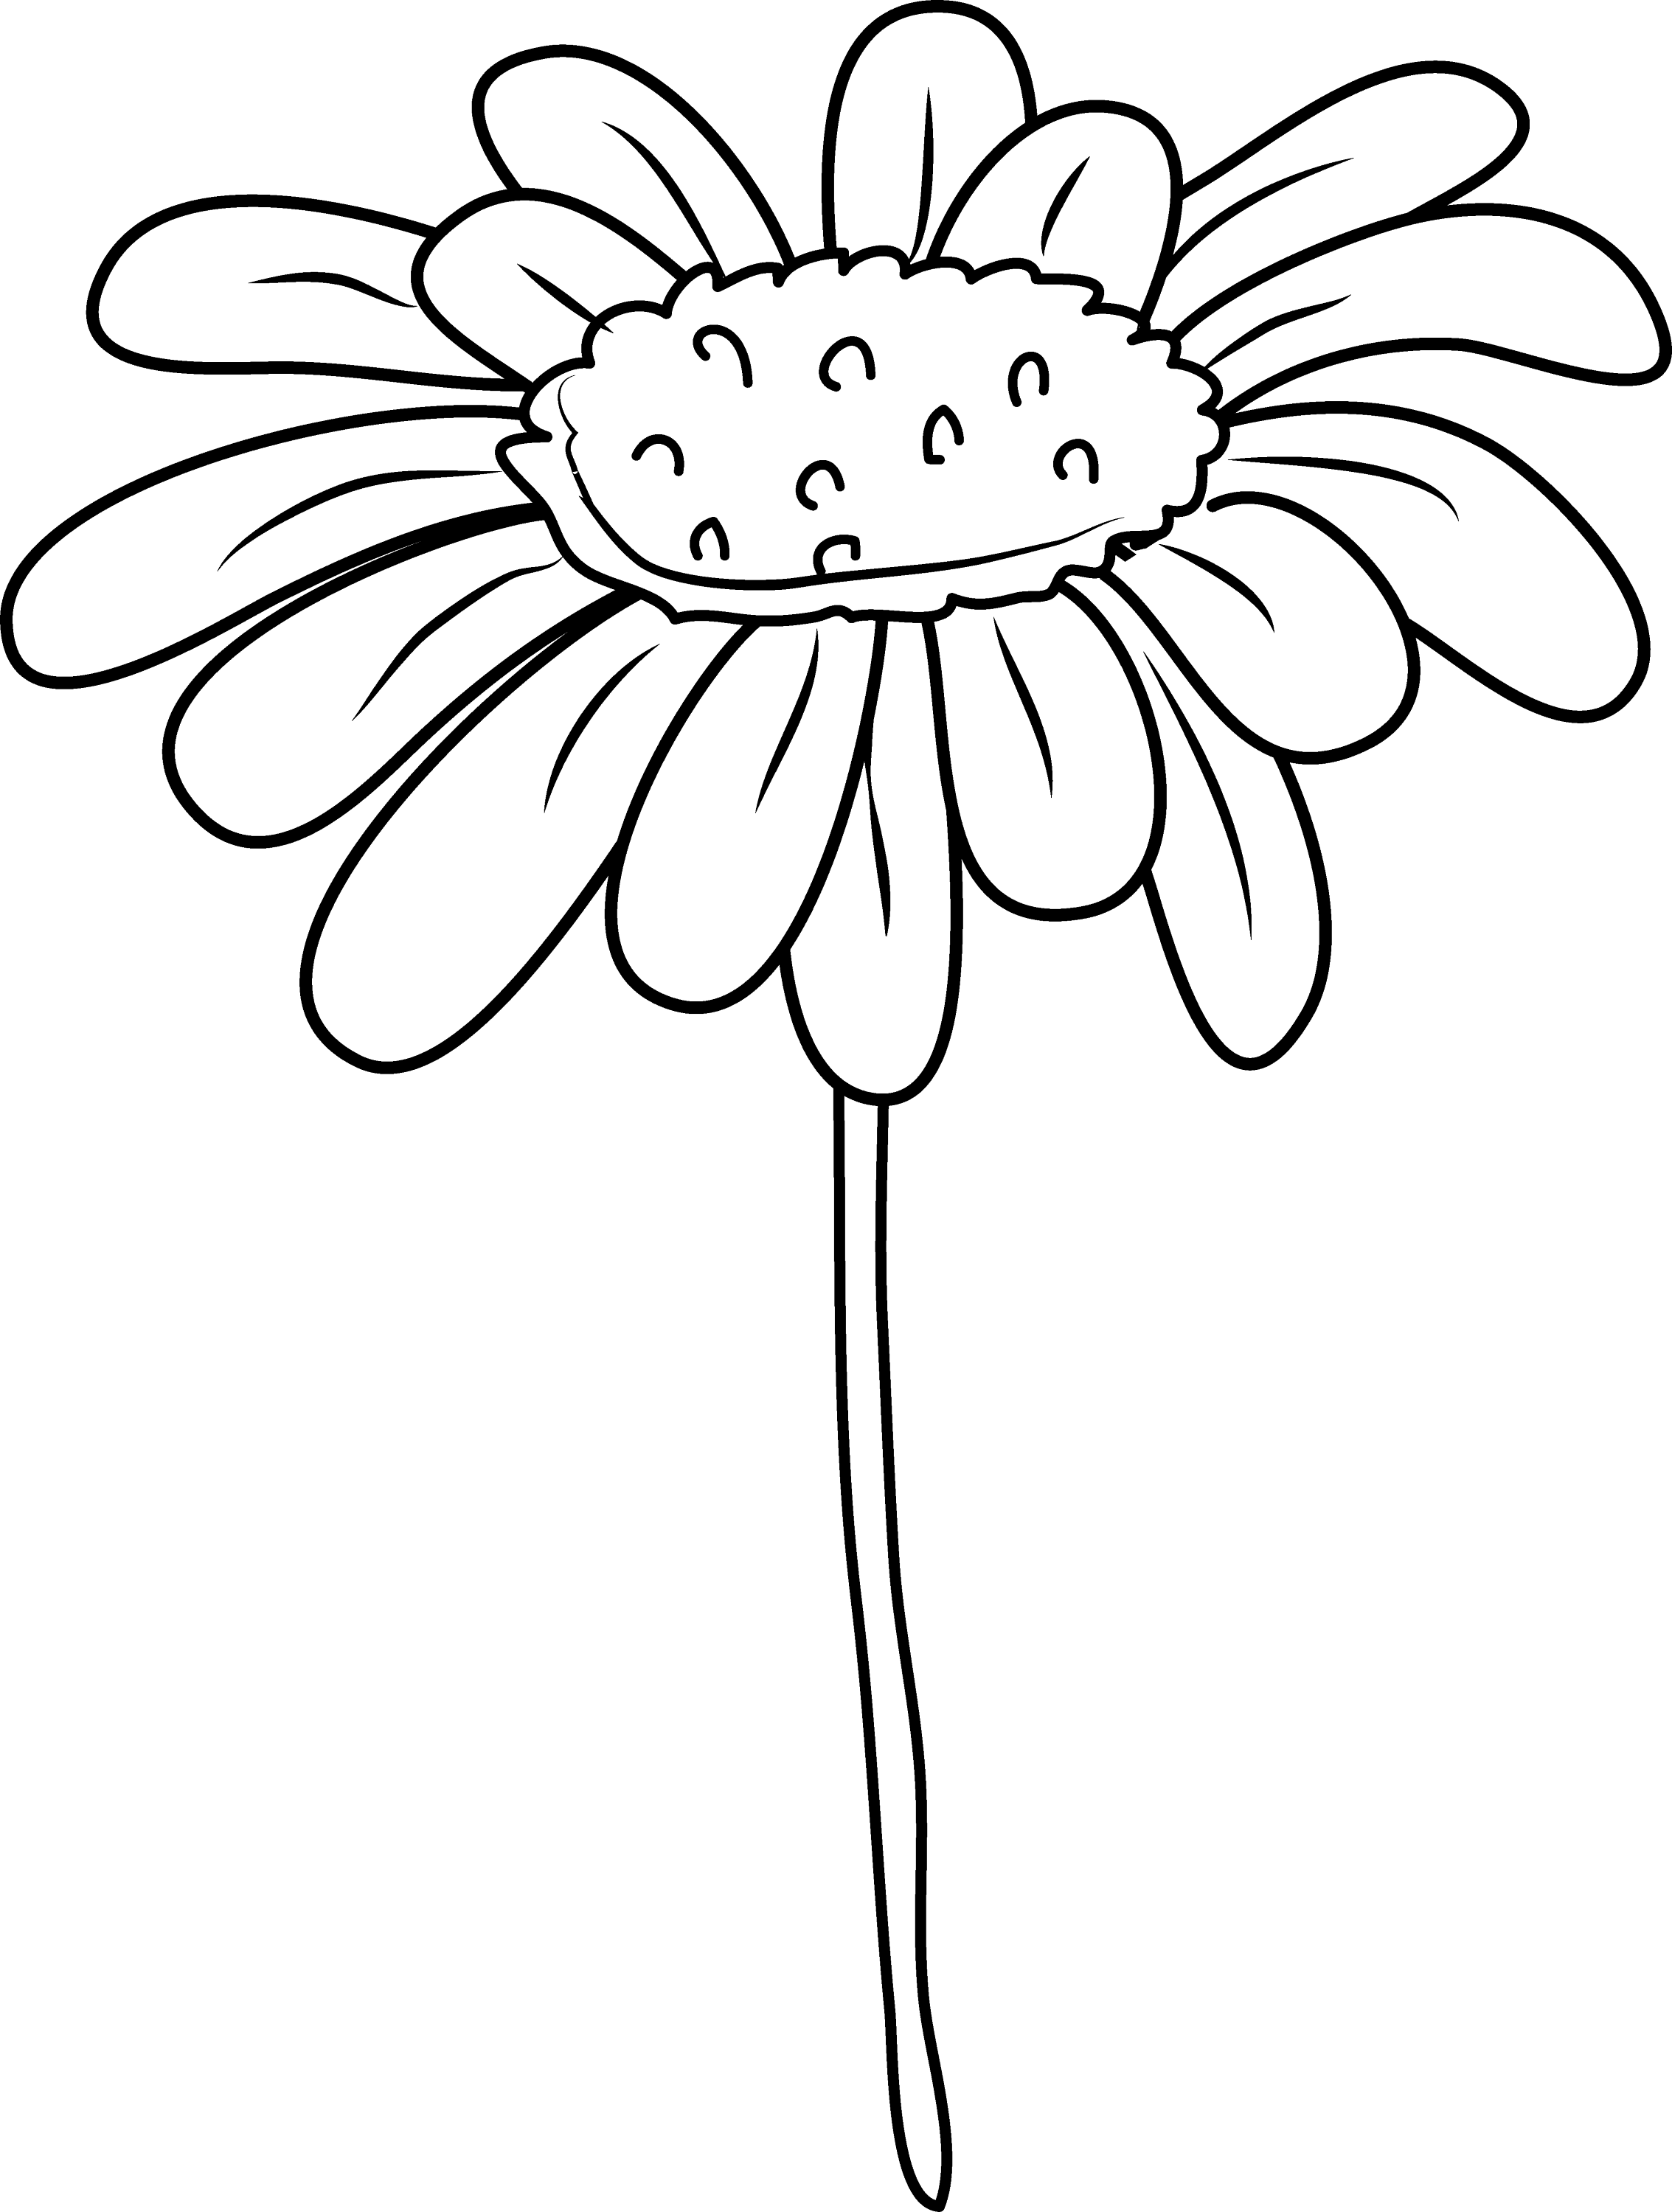 Daisy Flower Coloring Page Free Clip Art